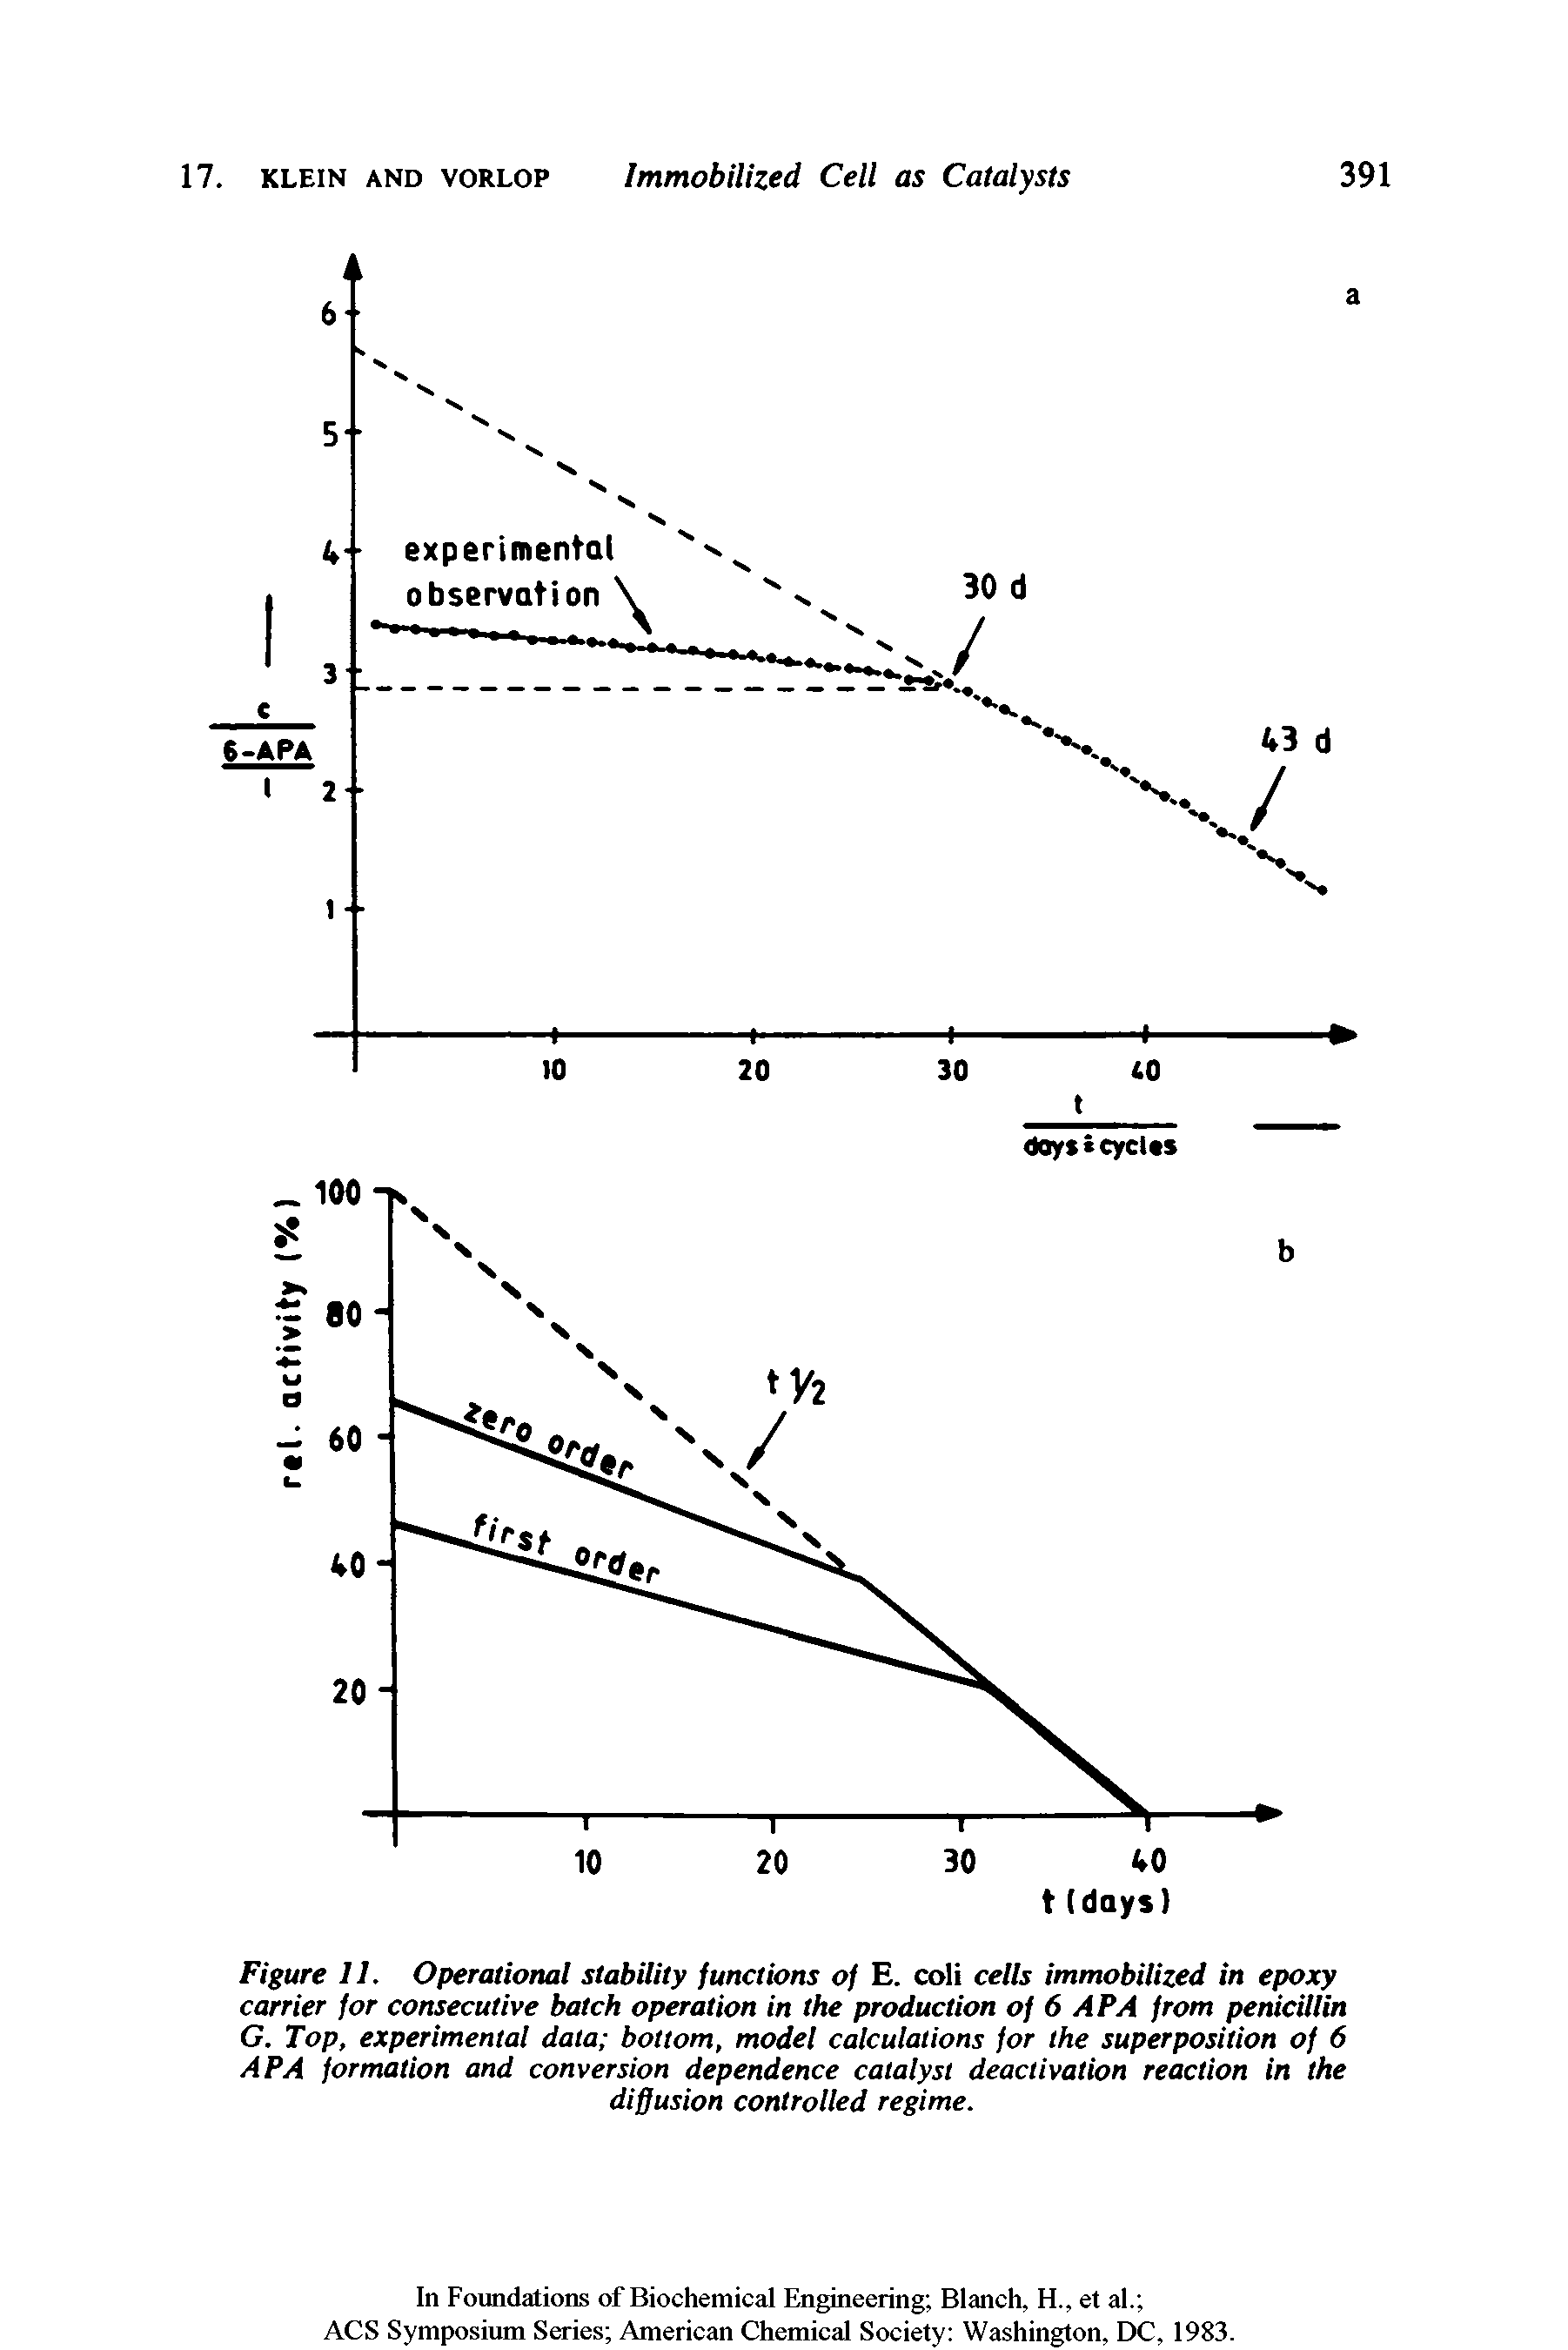 Figure 11. Operational stability functions of E. coli cells immobilized in epoxy carrier for consecutive batch operation in the production of 6 APA from penicillin G. Top, experimental data bottom, model calculations for the superposition of 6 APA formation and conversion dependence catalyst deactivation reaction in the diffusion controlled regime.